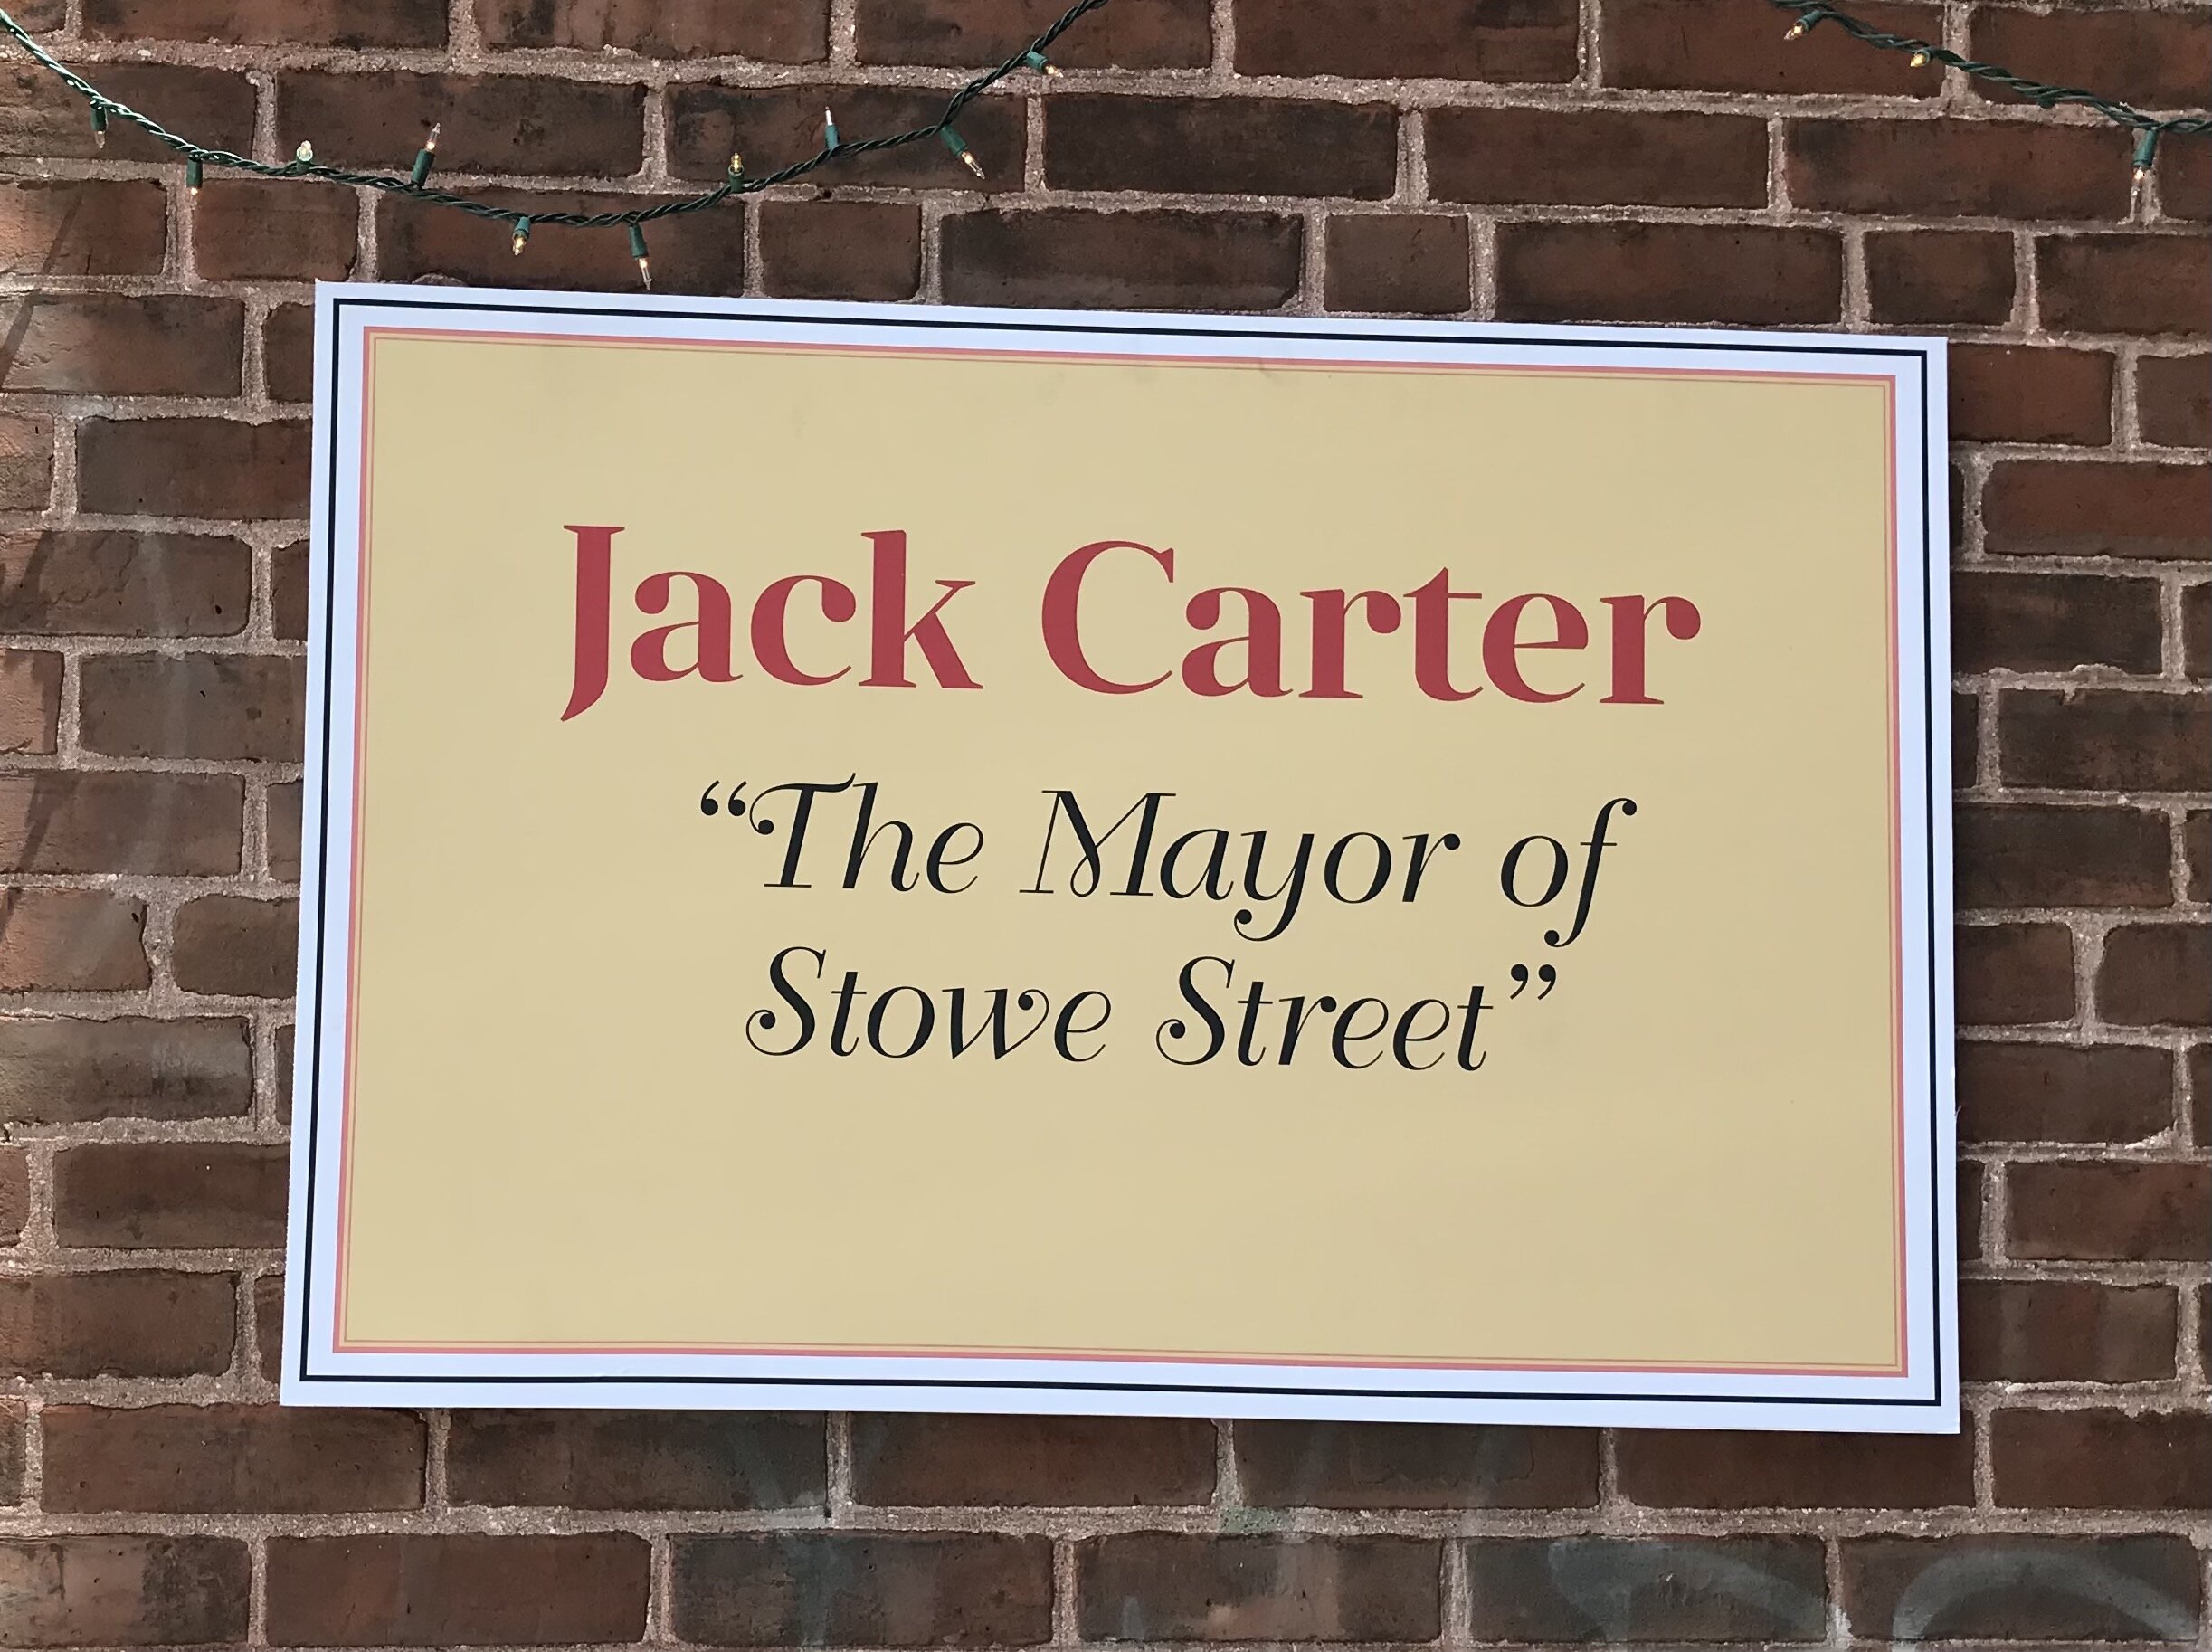   Many fondly recall Jack Carter's unofficial title, 'The Mayor of Stowe Street.' Photo by Anna Brundage.  